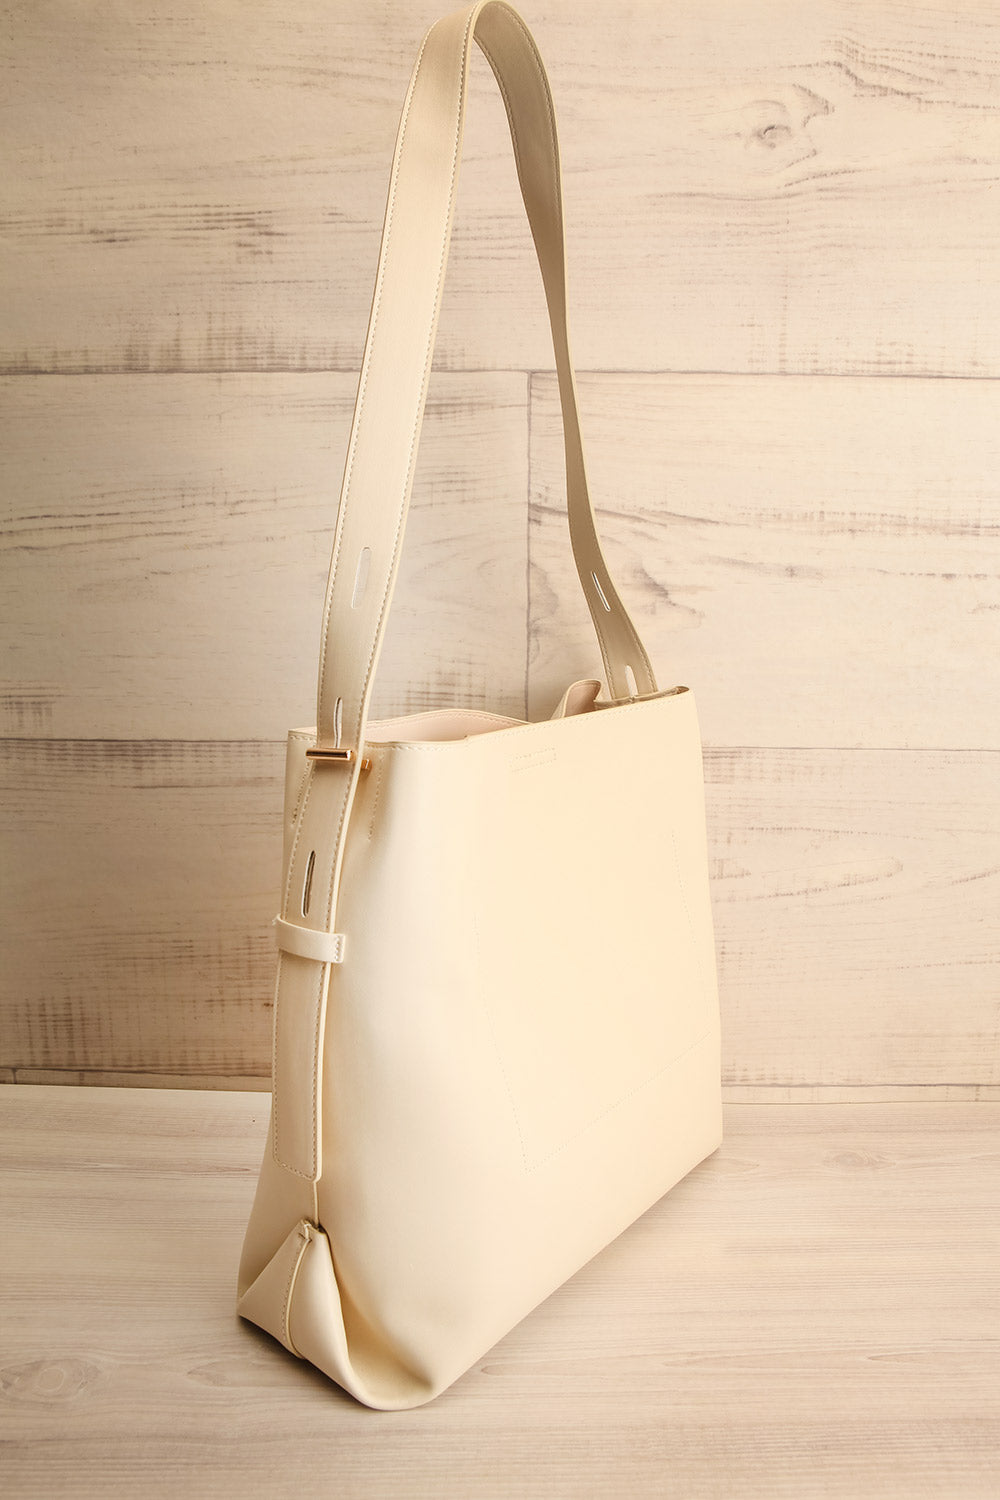 Mulhouse Ivory Faux Leather Tote Bag